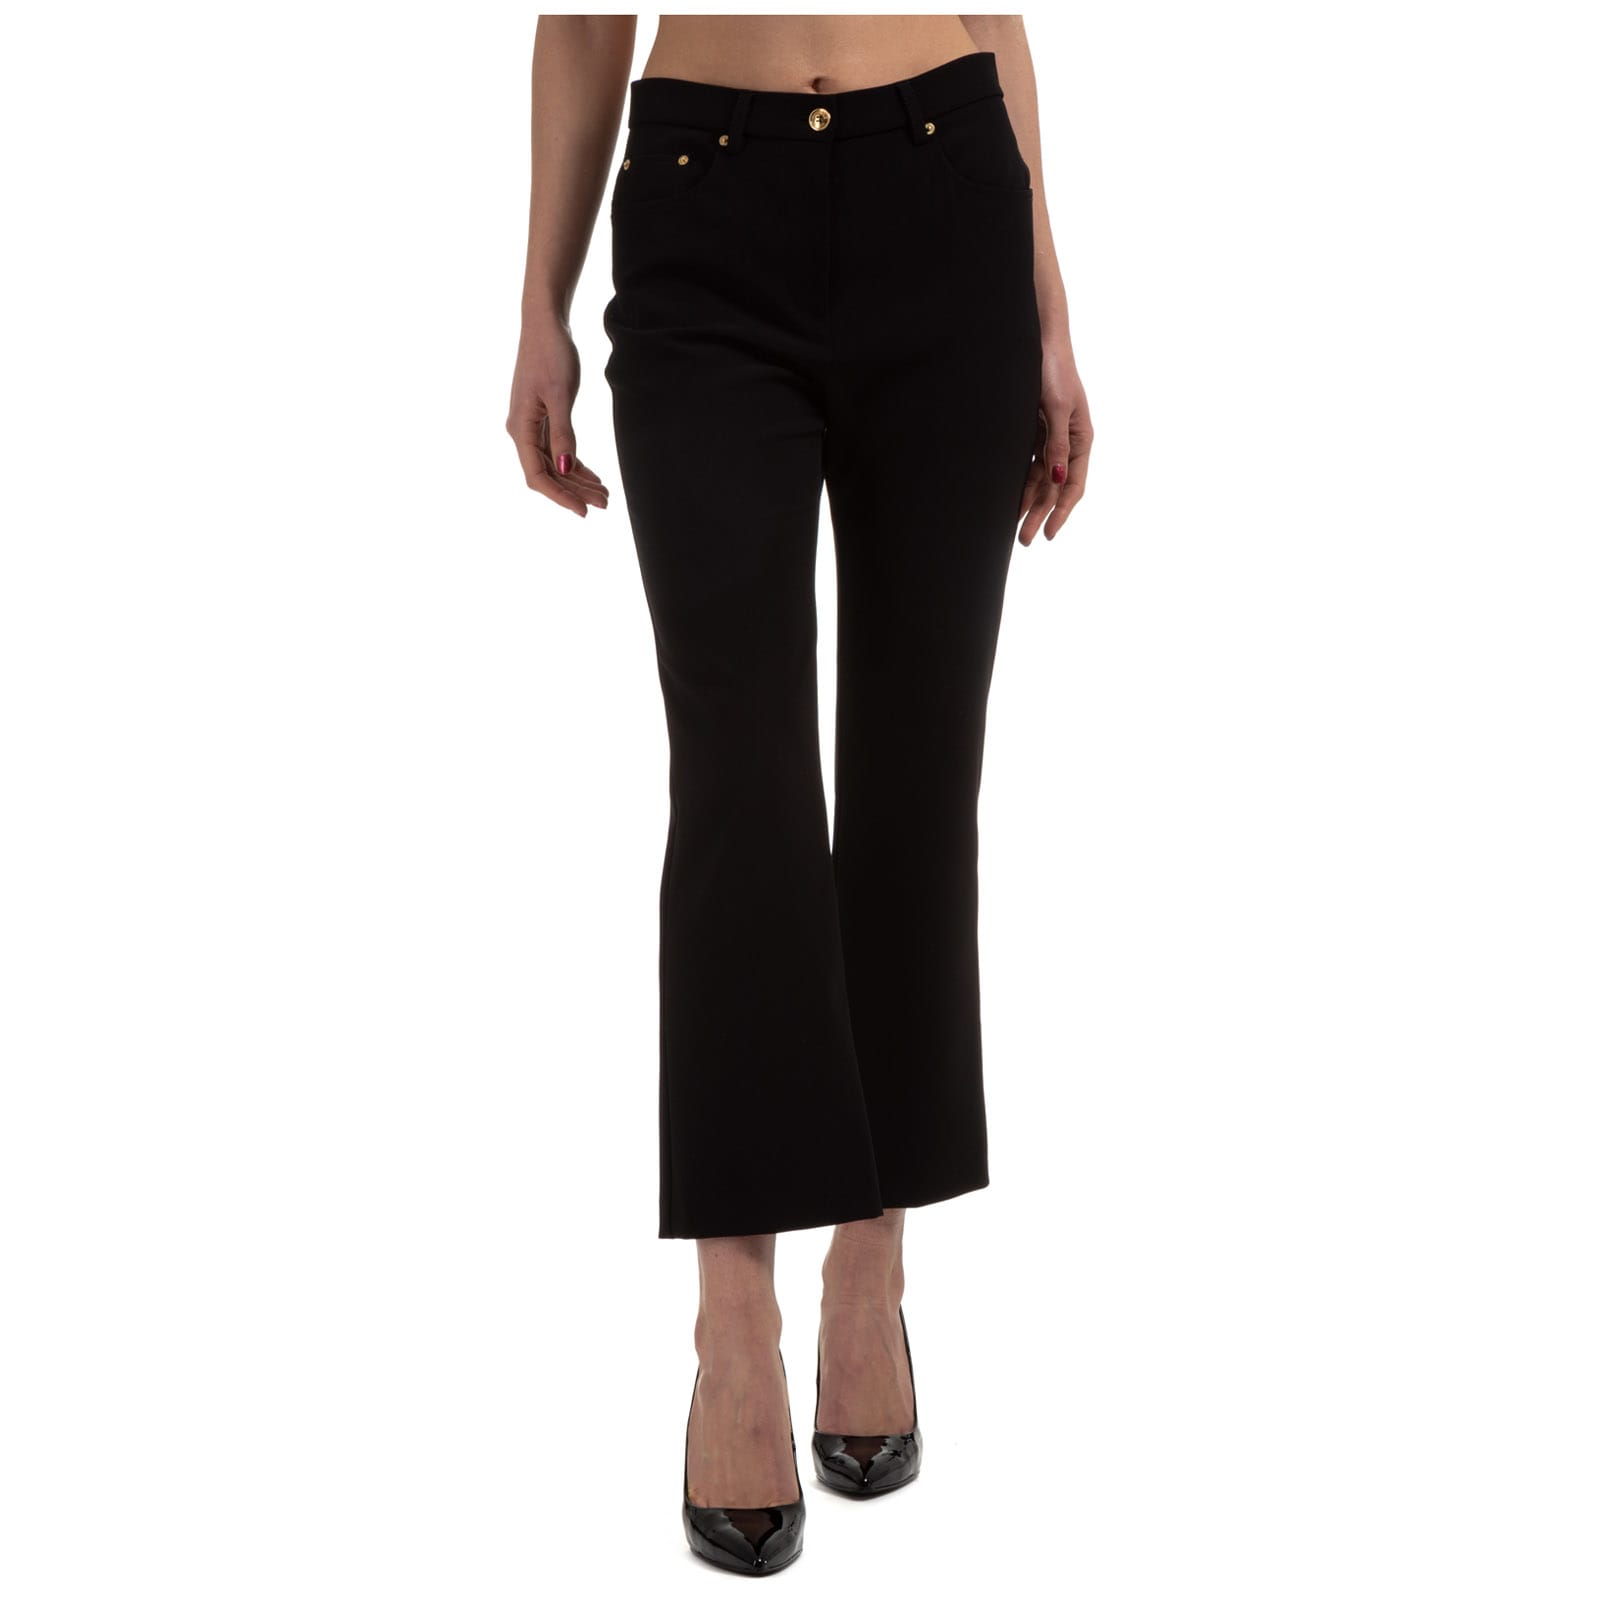 Boutique Moschino Orbyt Descender 2.0 Trousers